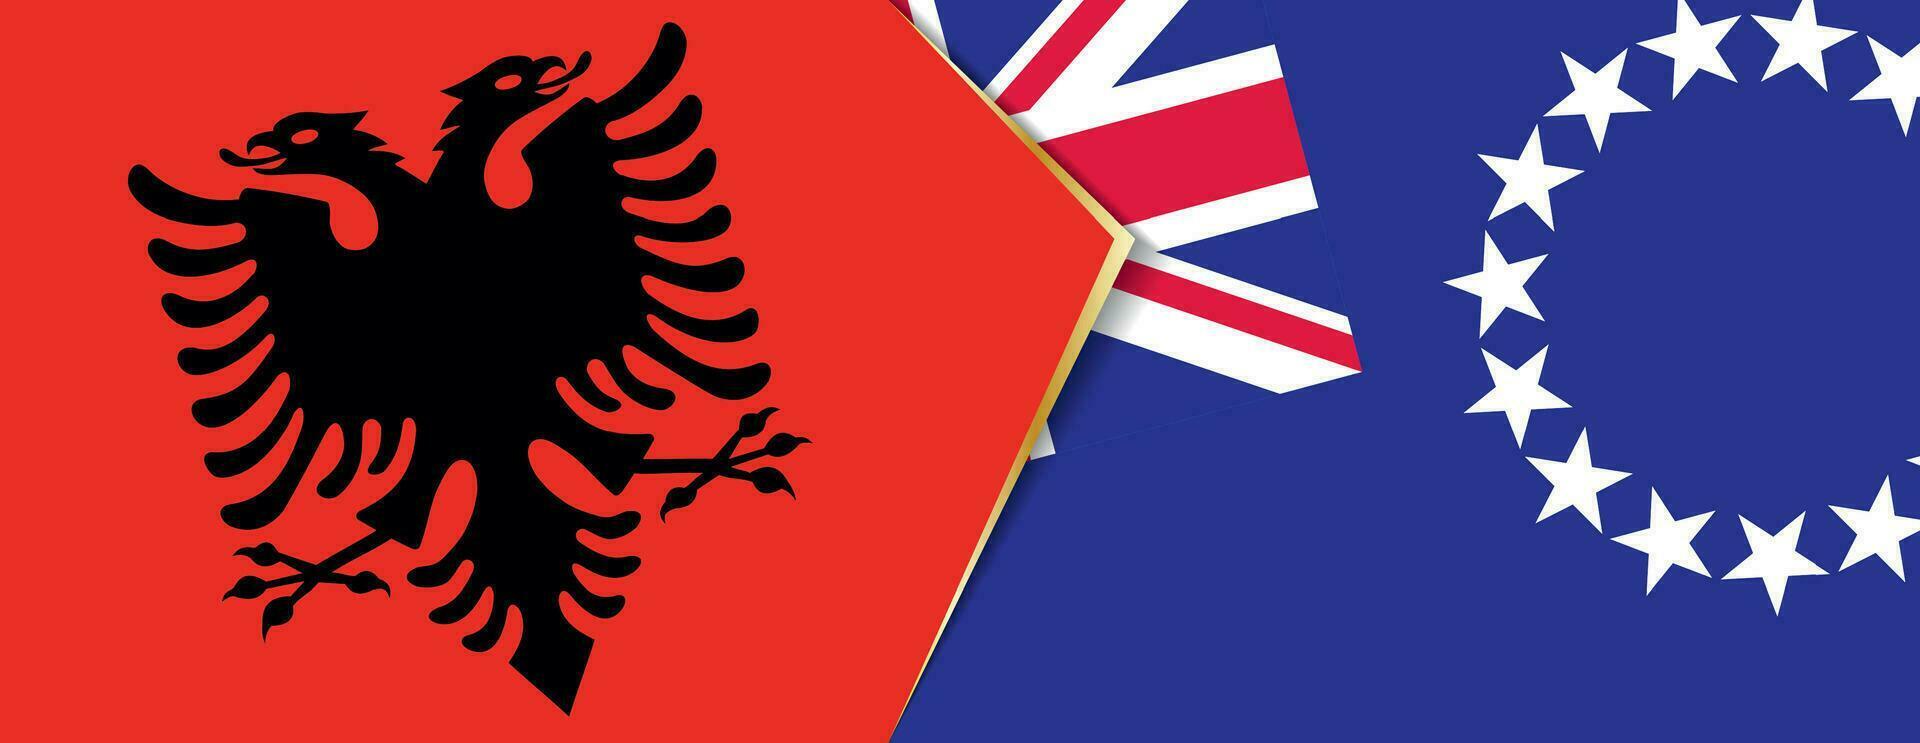 Albania and Cook Islands flags, two vector flags.